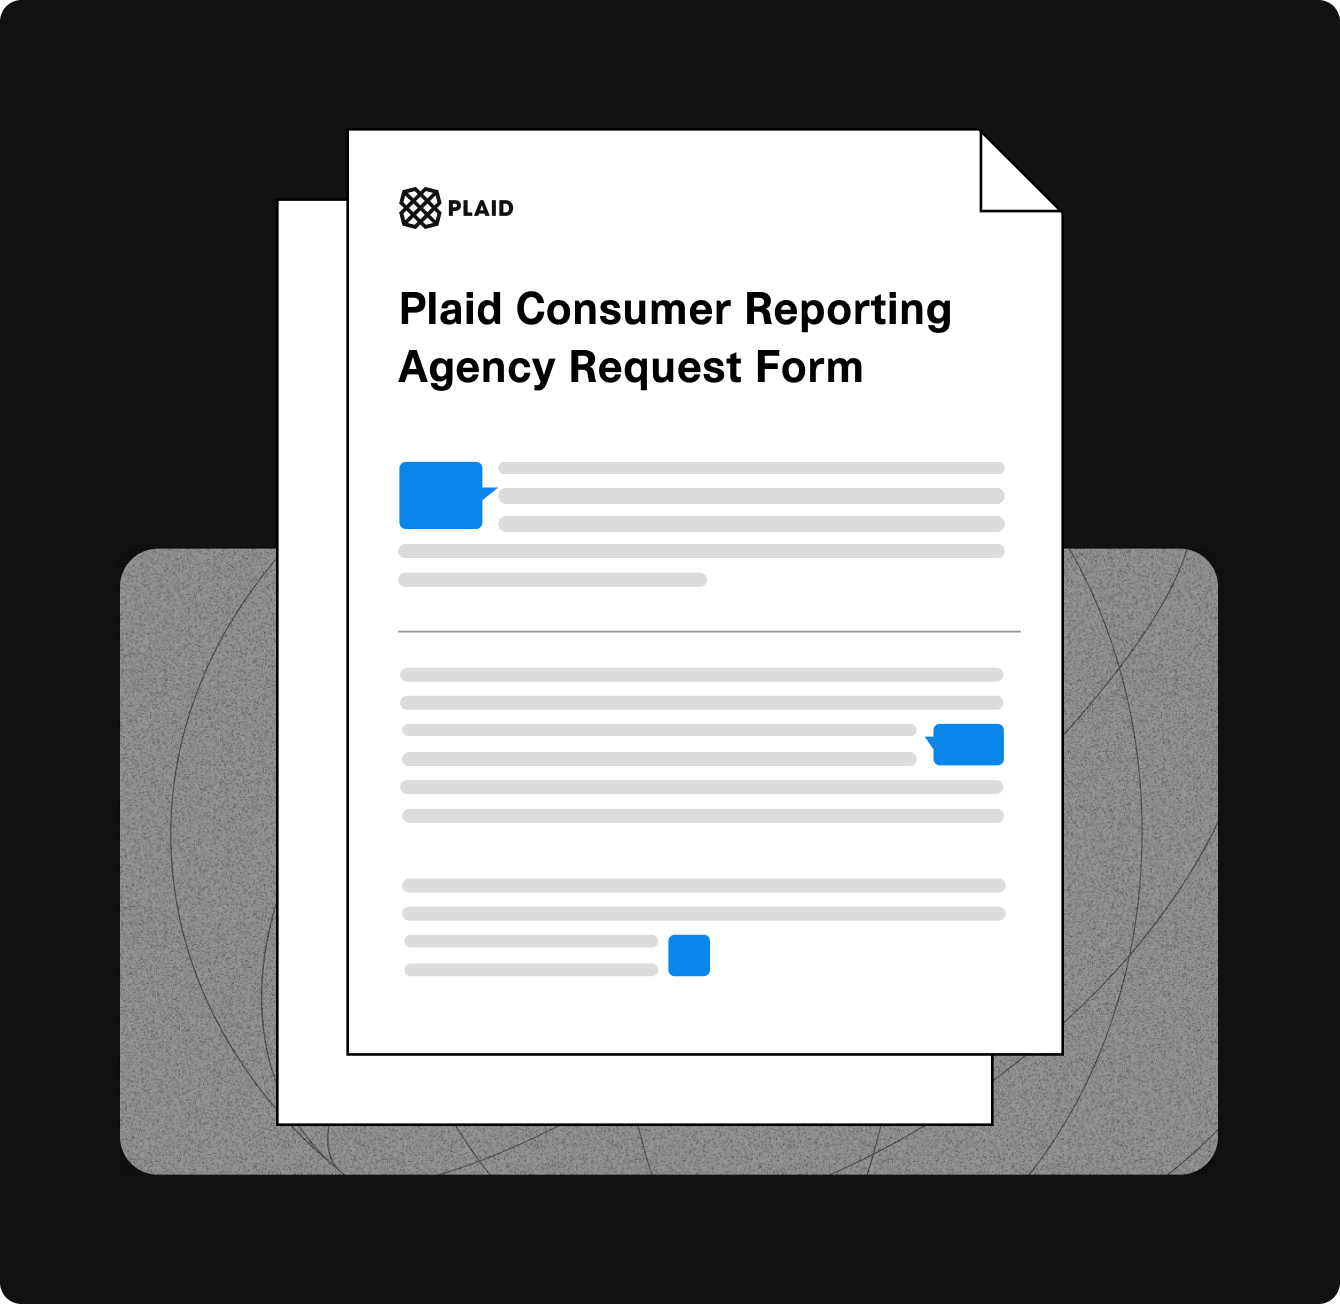 PLAID Consumer Reporting Agency Request Form document on a dark background.